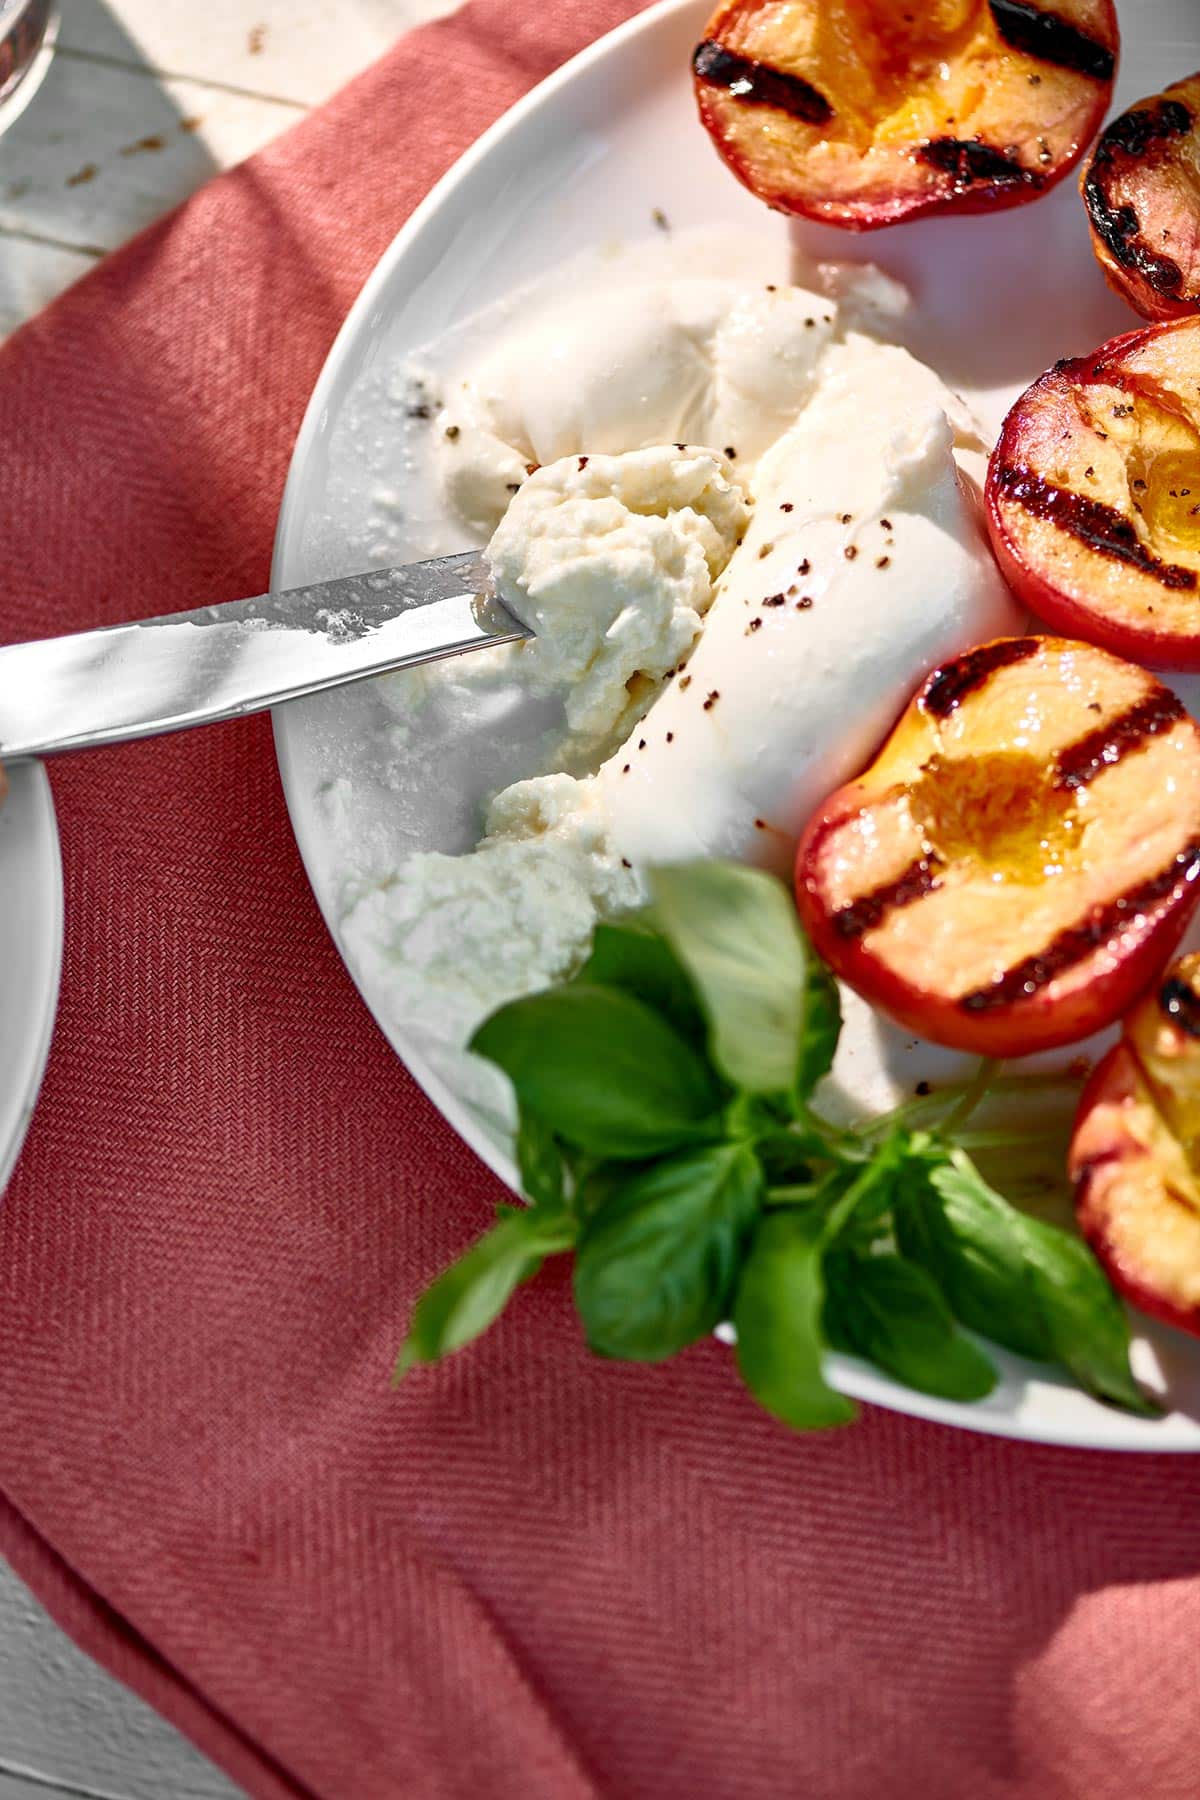 Cutting ball of burrata cheese with knife next to grilled peaches.